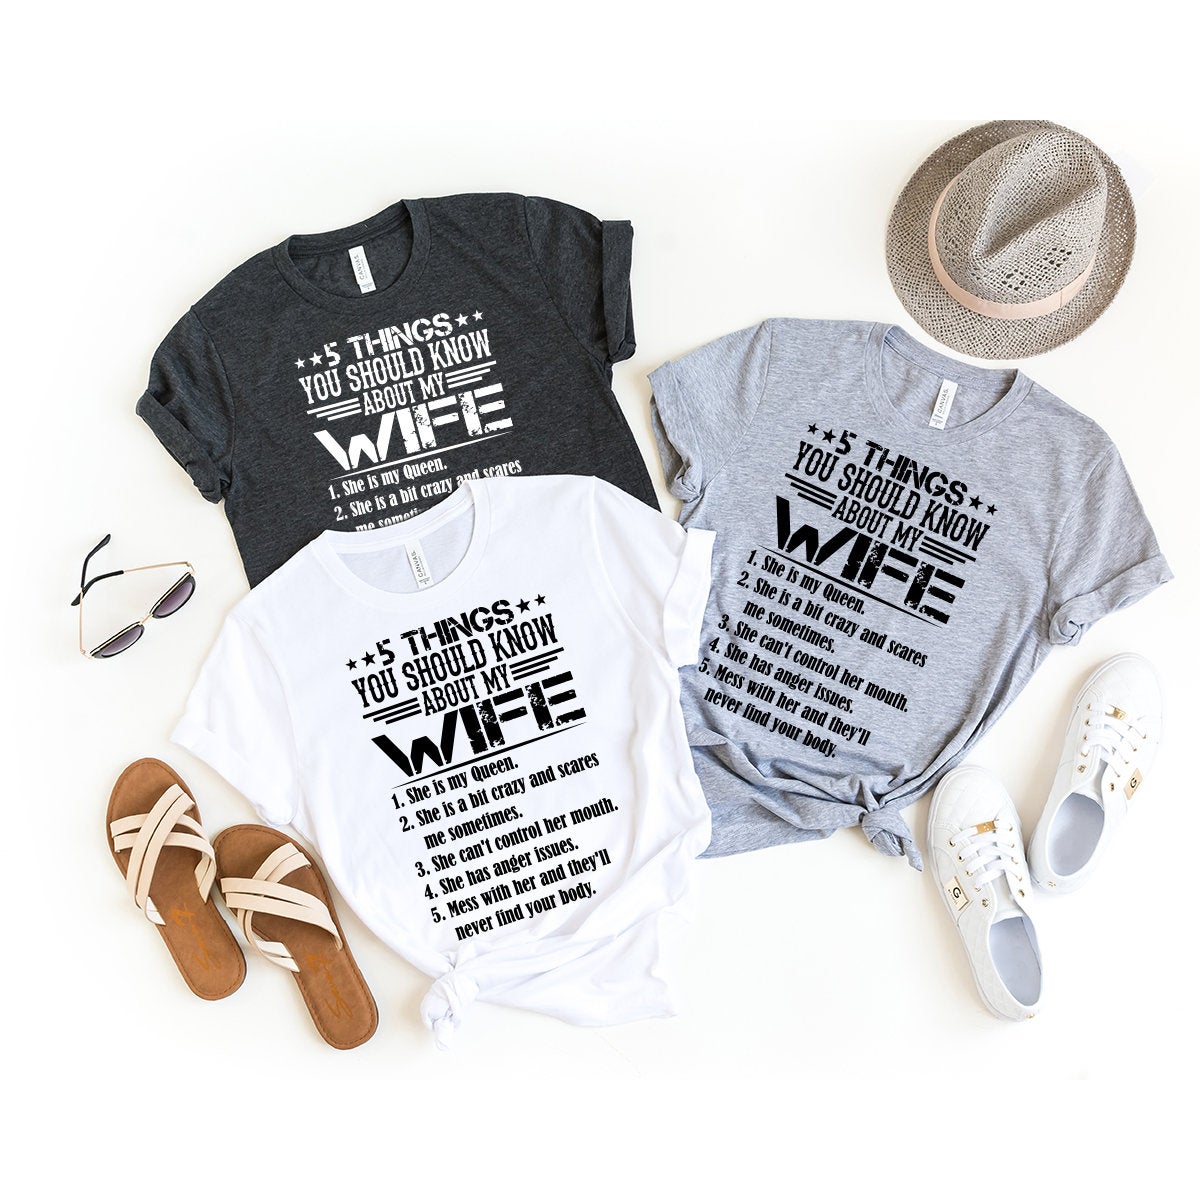 Funny Husband Shirt, Funny Gift For Husband, 5 Things You Should Know About My Wife T-Shirt, Best Husband Shirt, Sarcastic Husband Tee - Fastdeliverytees.com